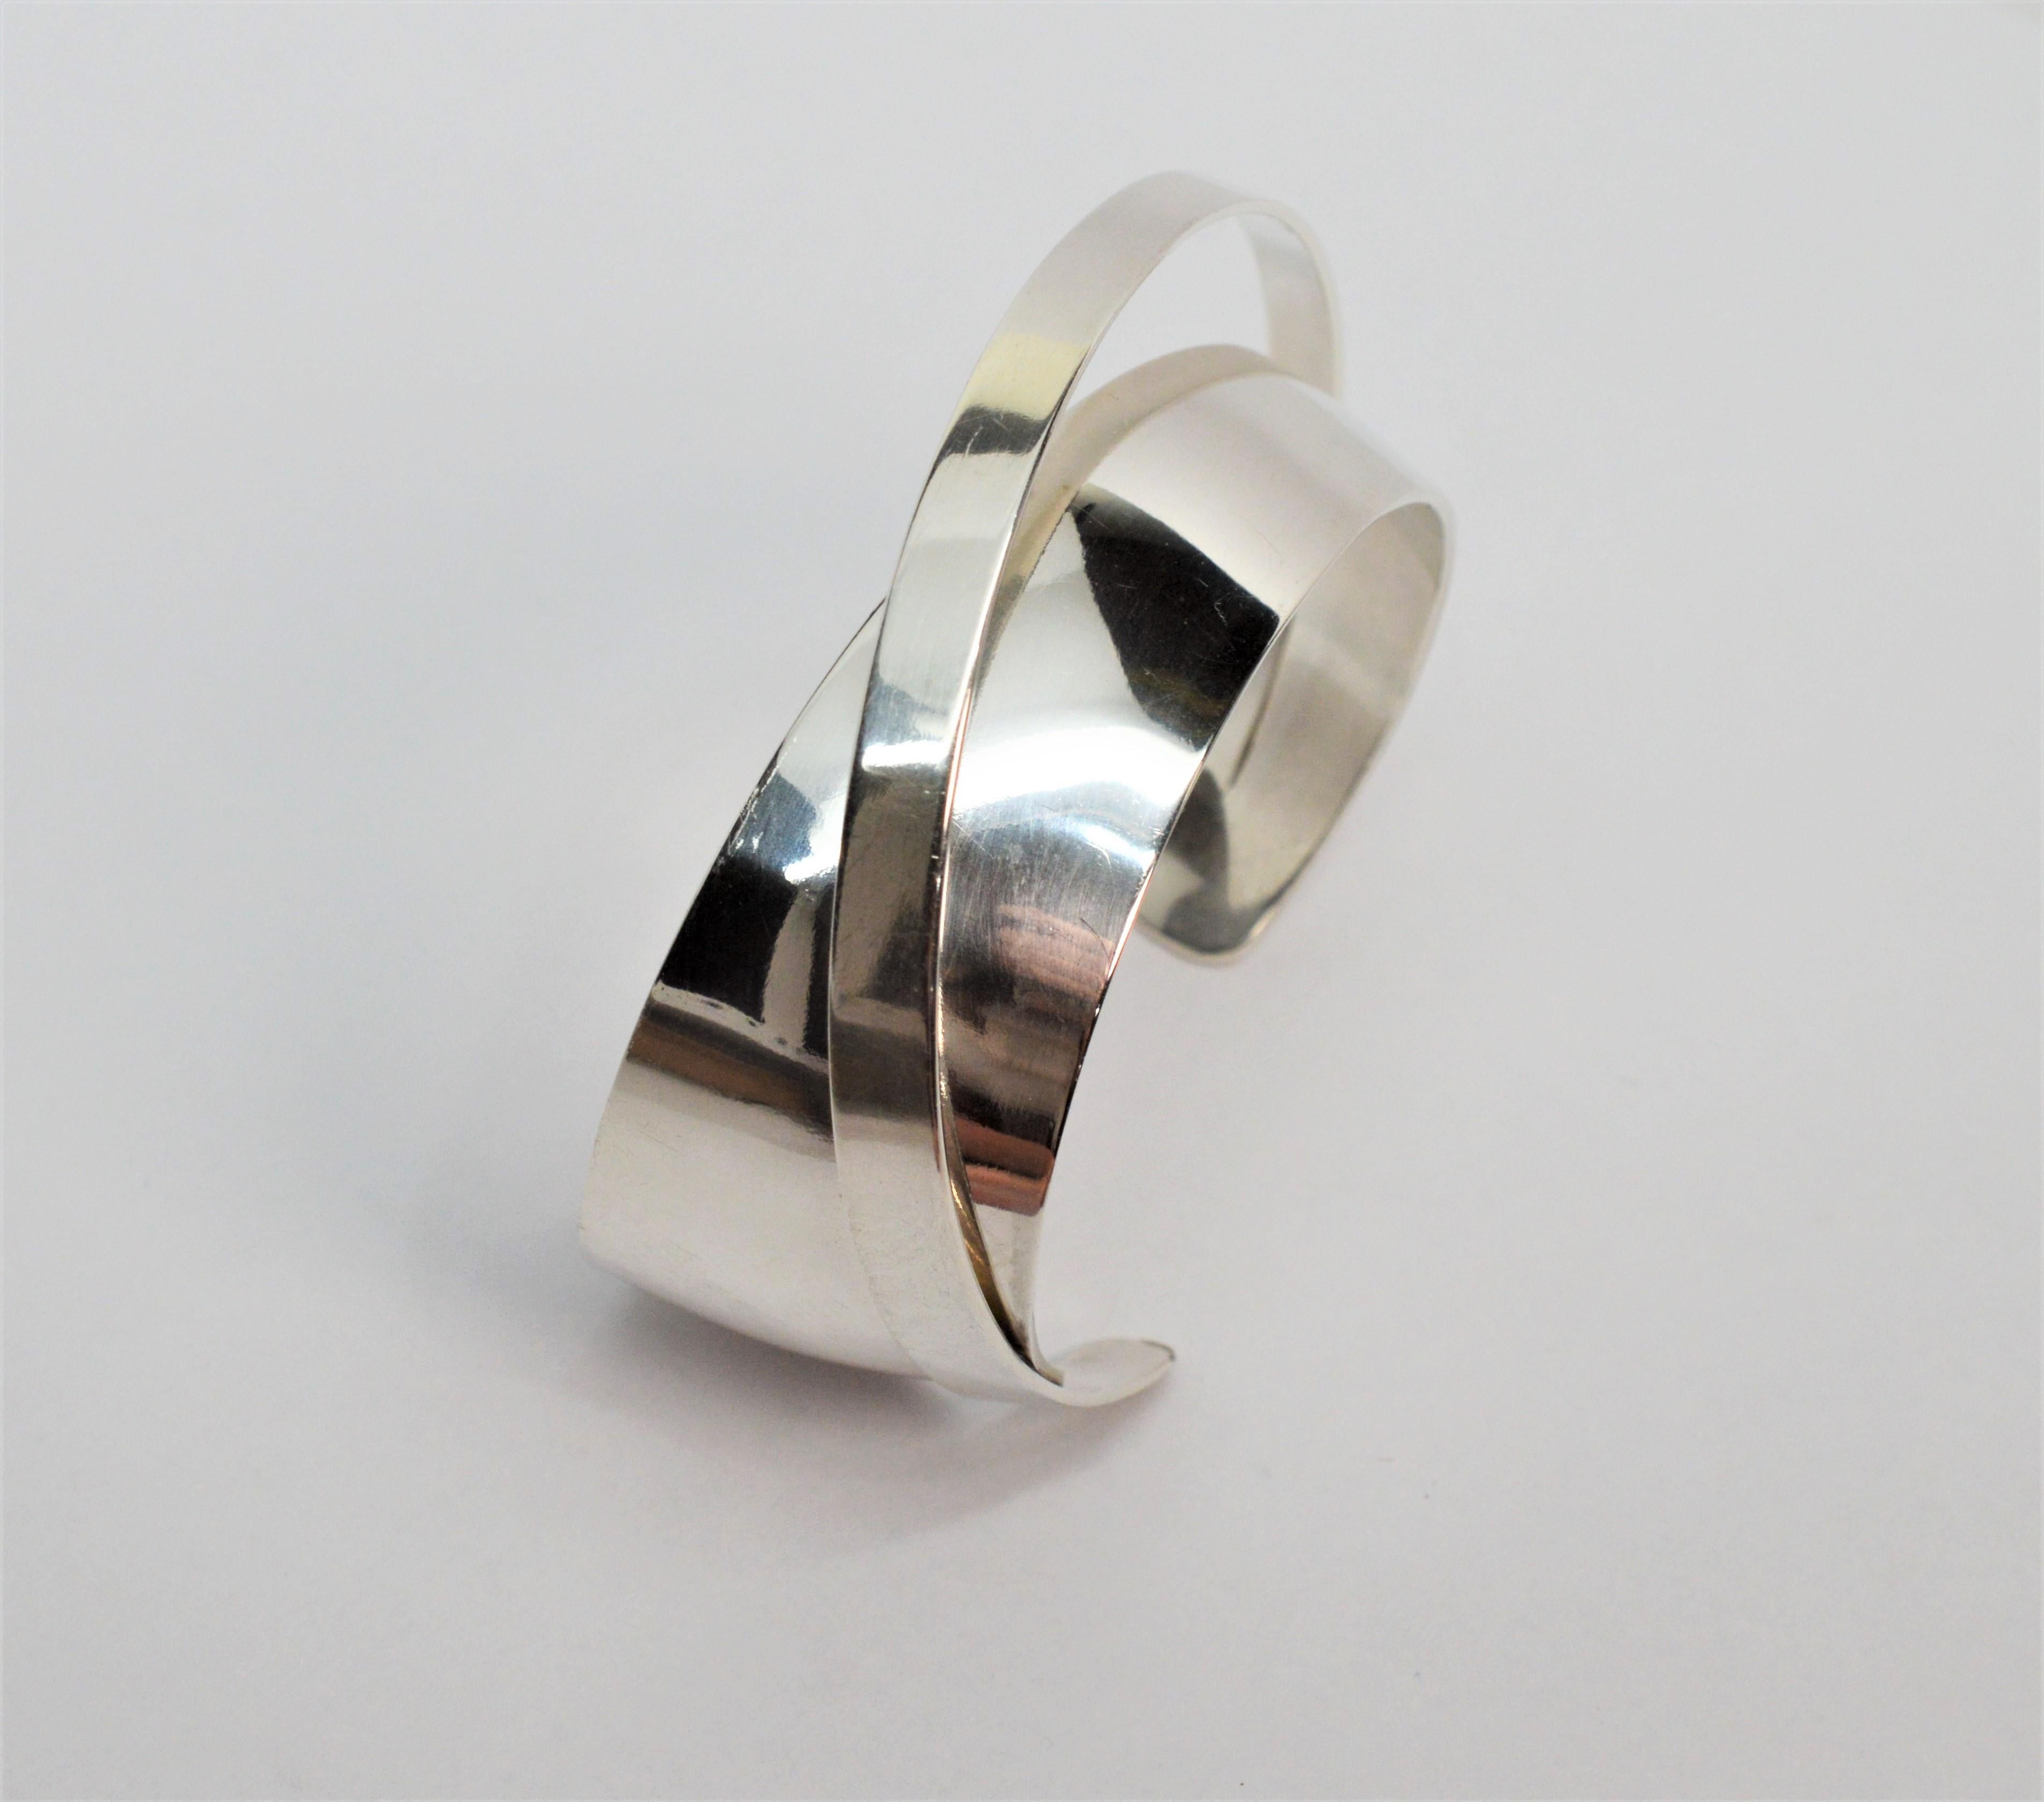 Abstract Sterling Silver Cuff Bracelet 1